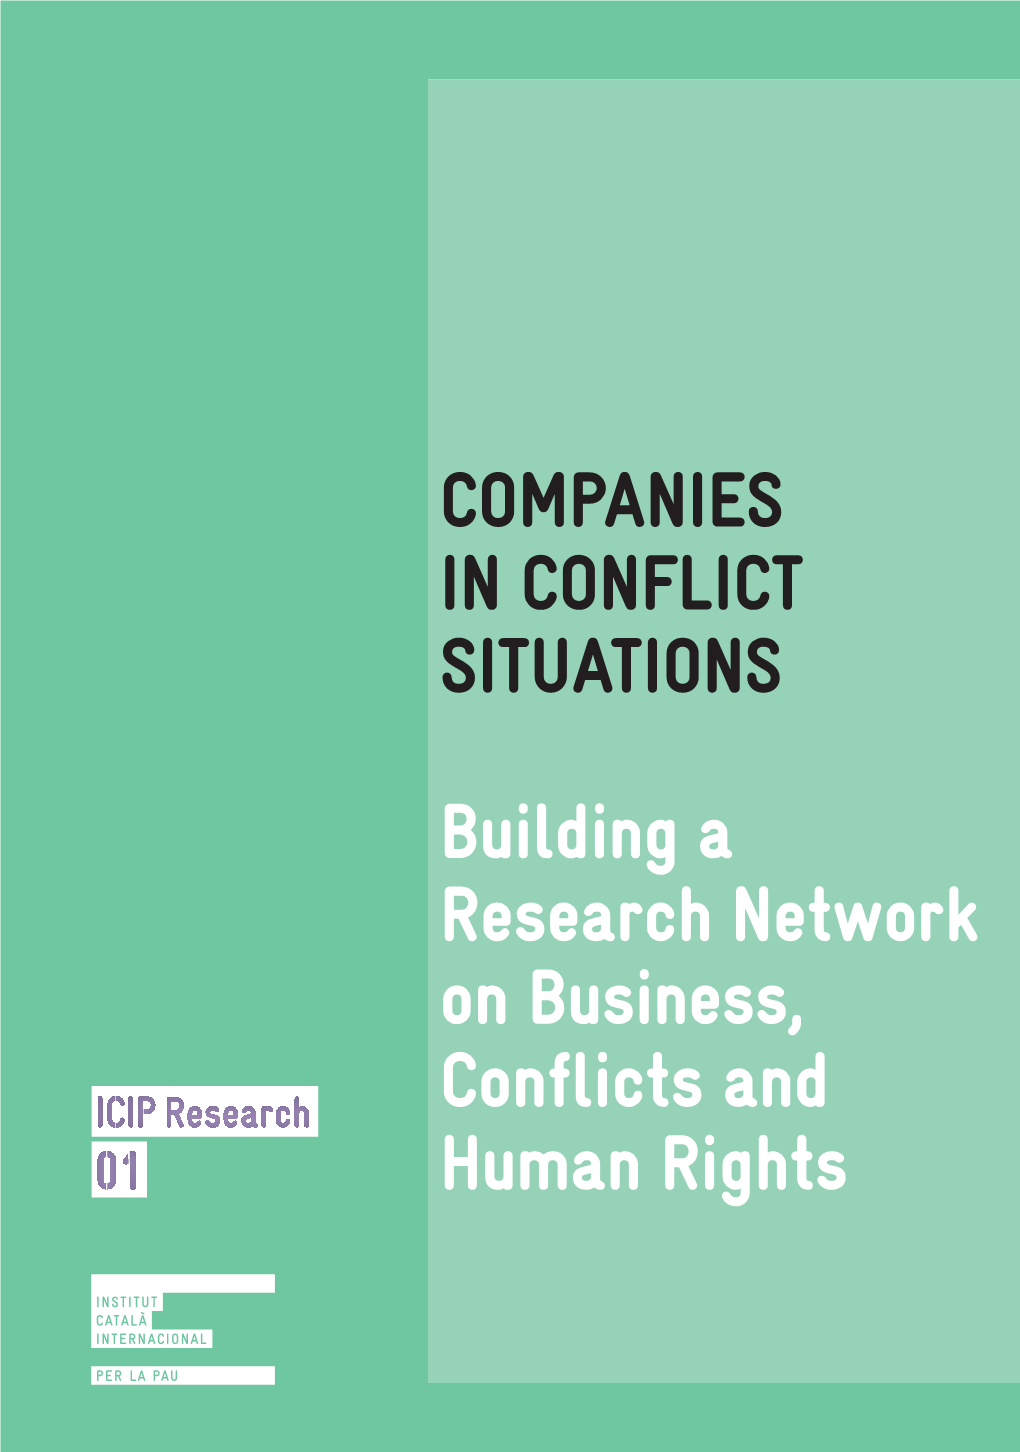 COMPANIES in CONFLICT SITUATIONS Building a Research Network on Business, Conflicts and Human Rights PREFACE